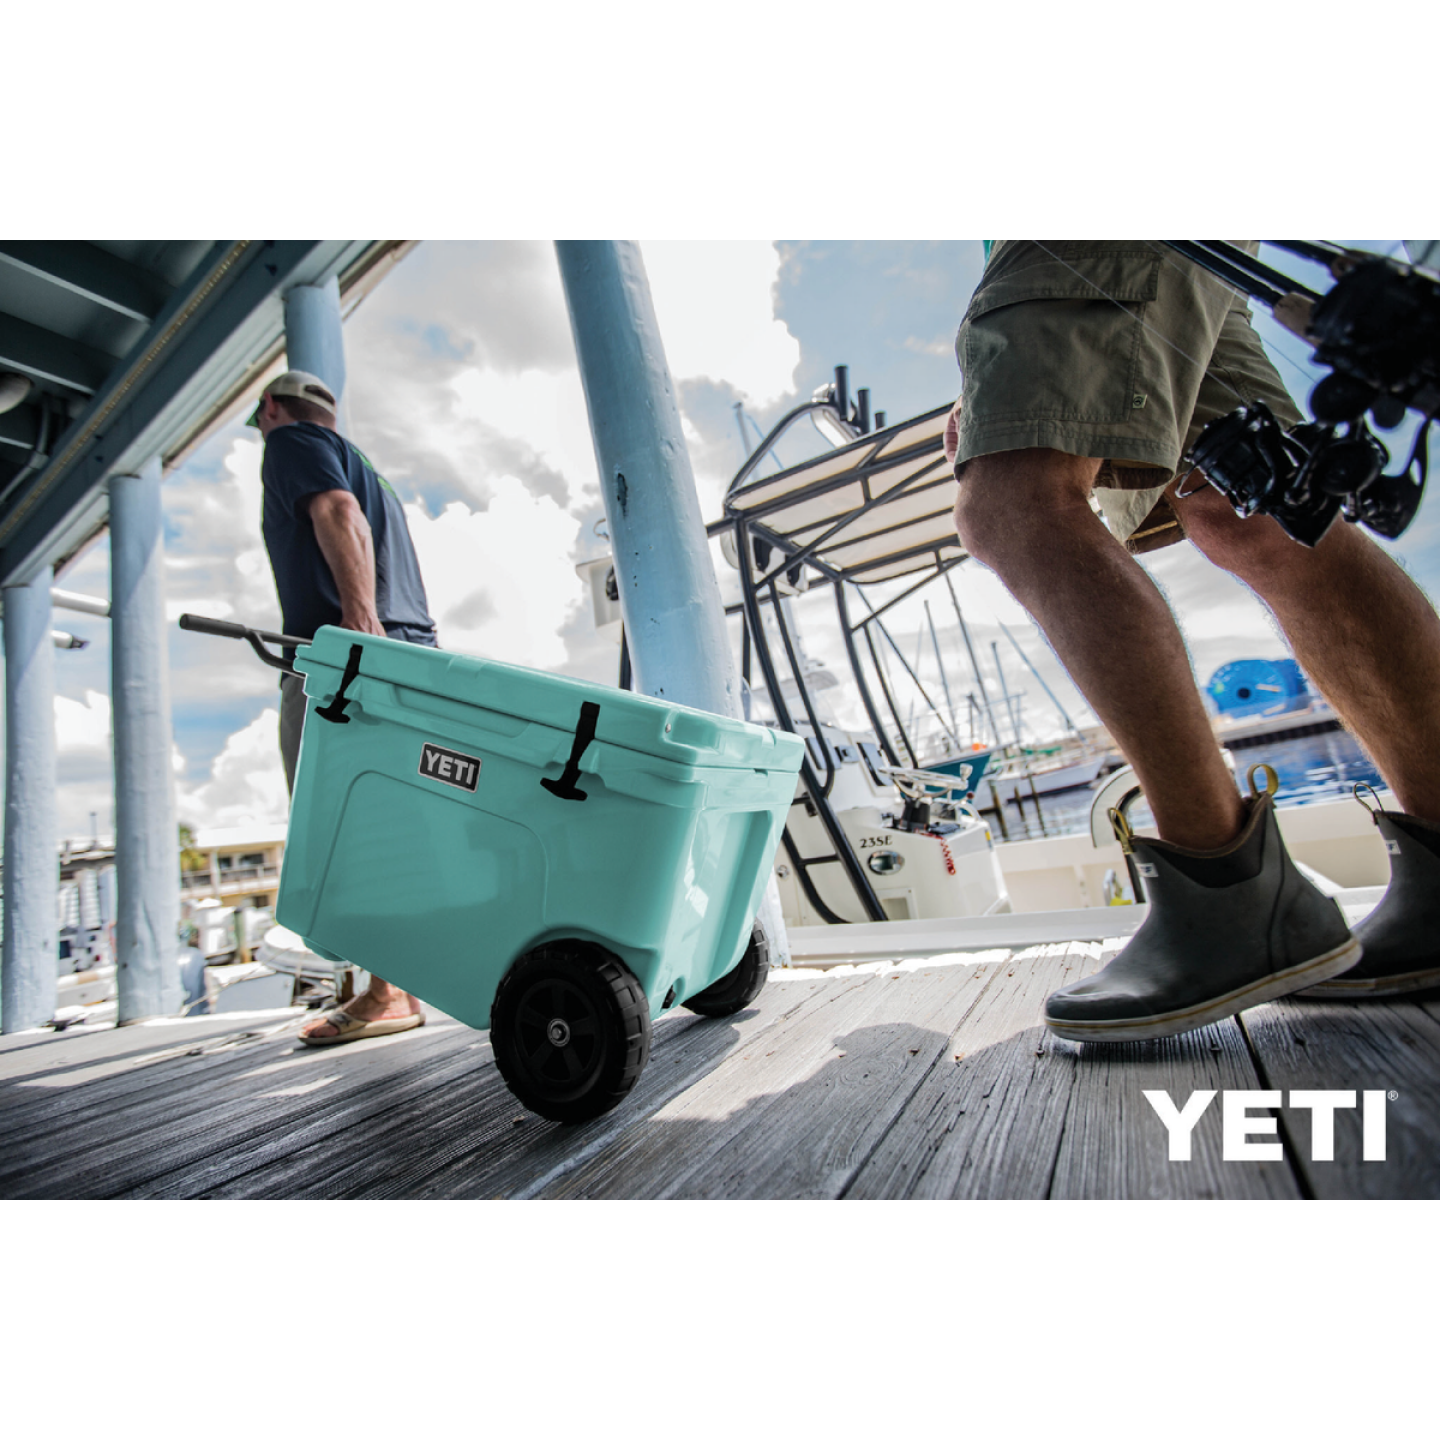 Yeti Tundra Haul Portable Wheeled Cooler for sale online